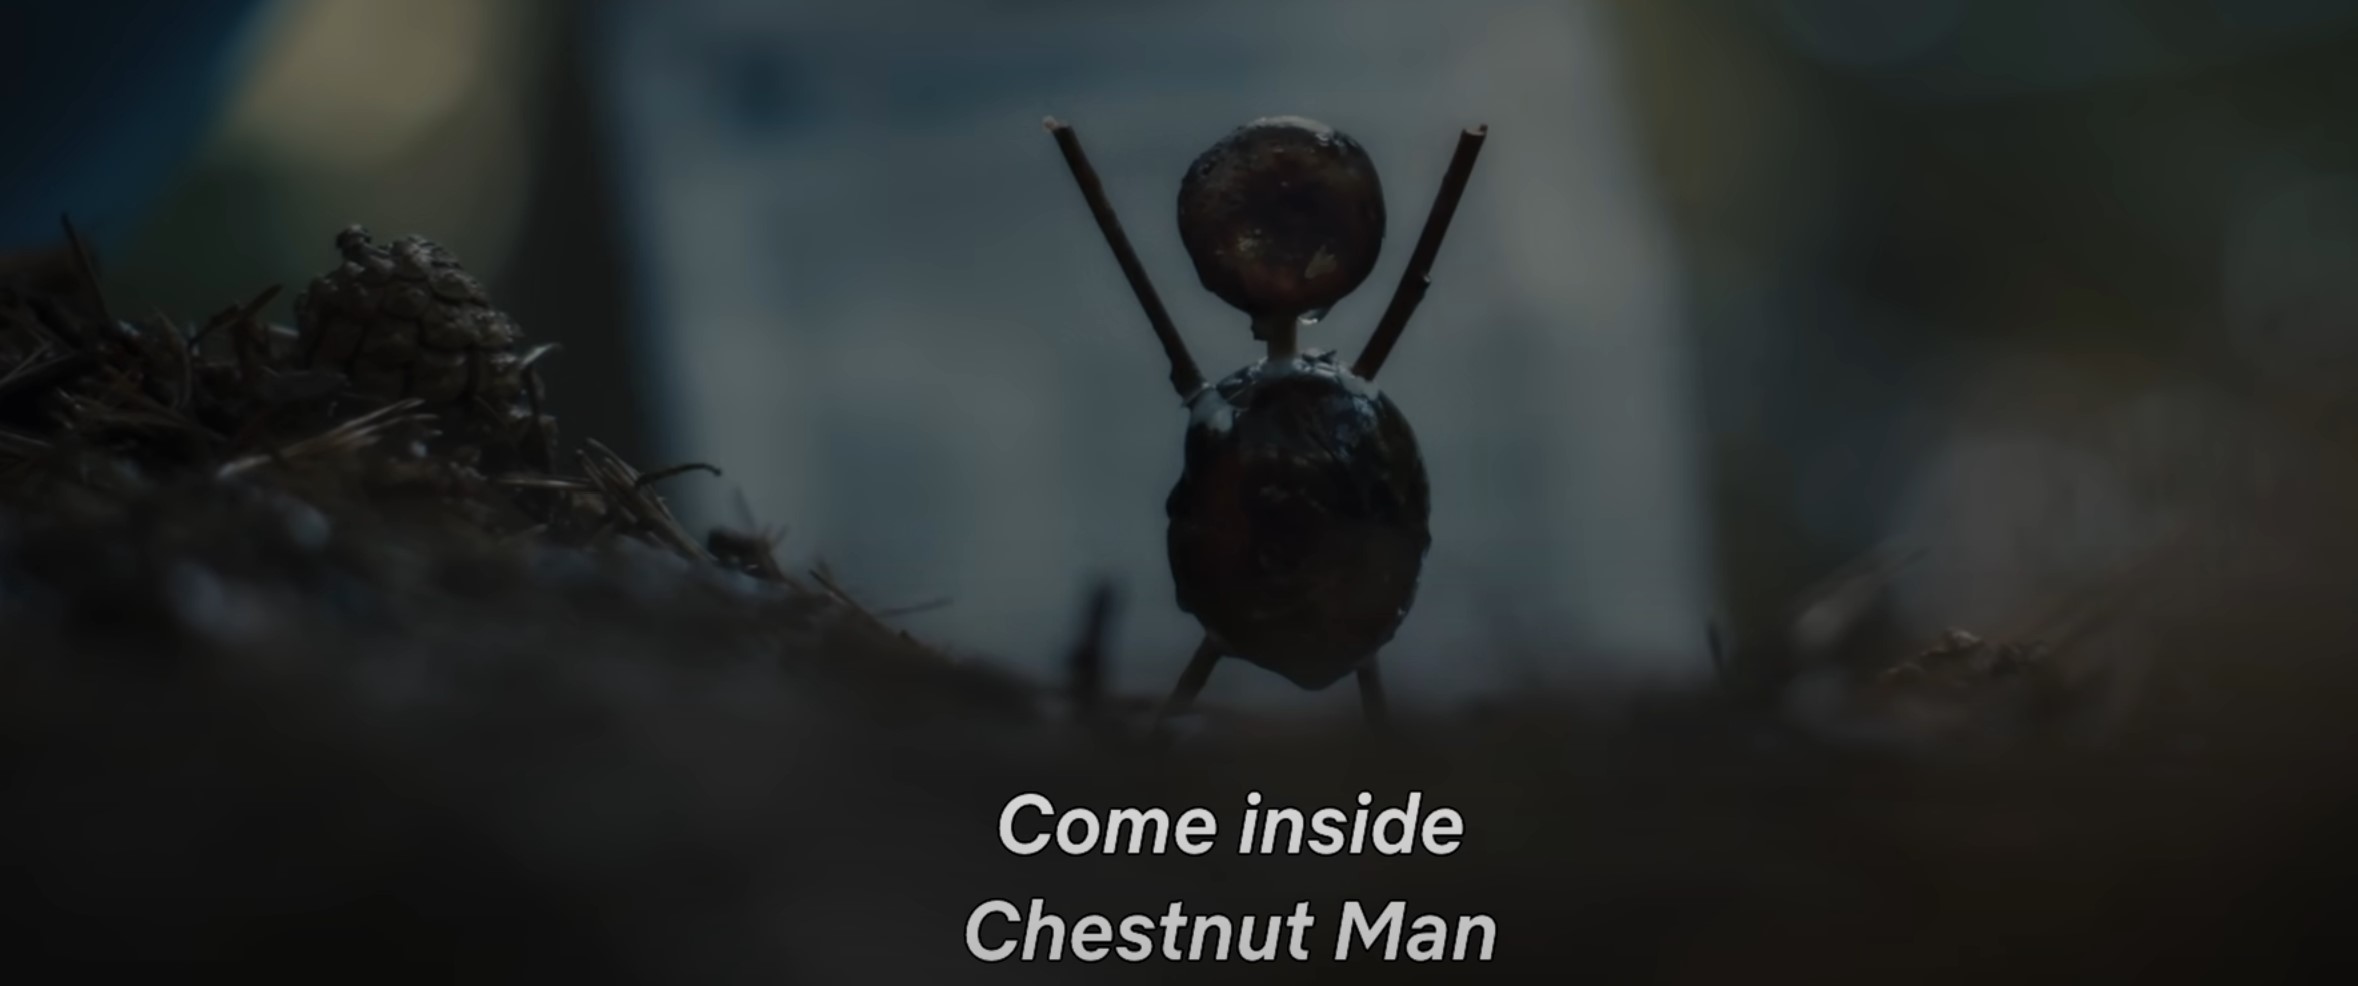 Netflix’s “The Chestnut Man” Release Date – When Is the chilling and suspenseful thriller Coming On Netflix?